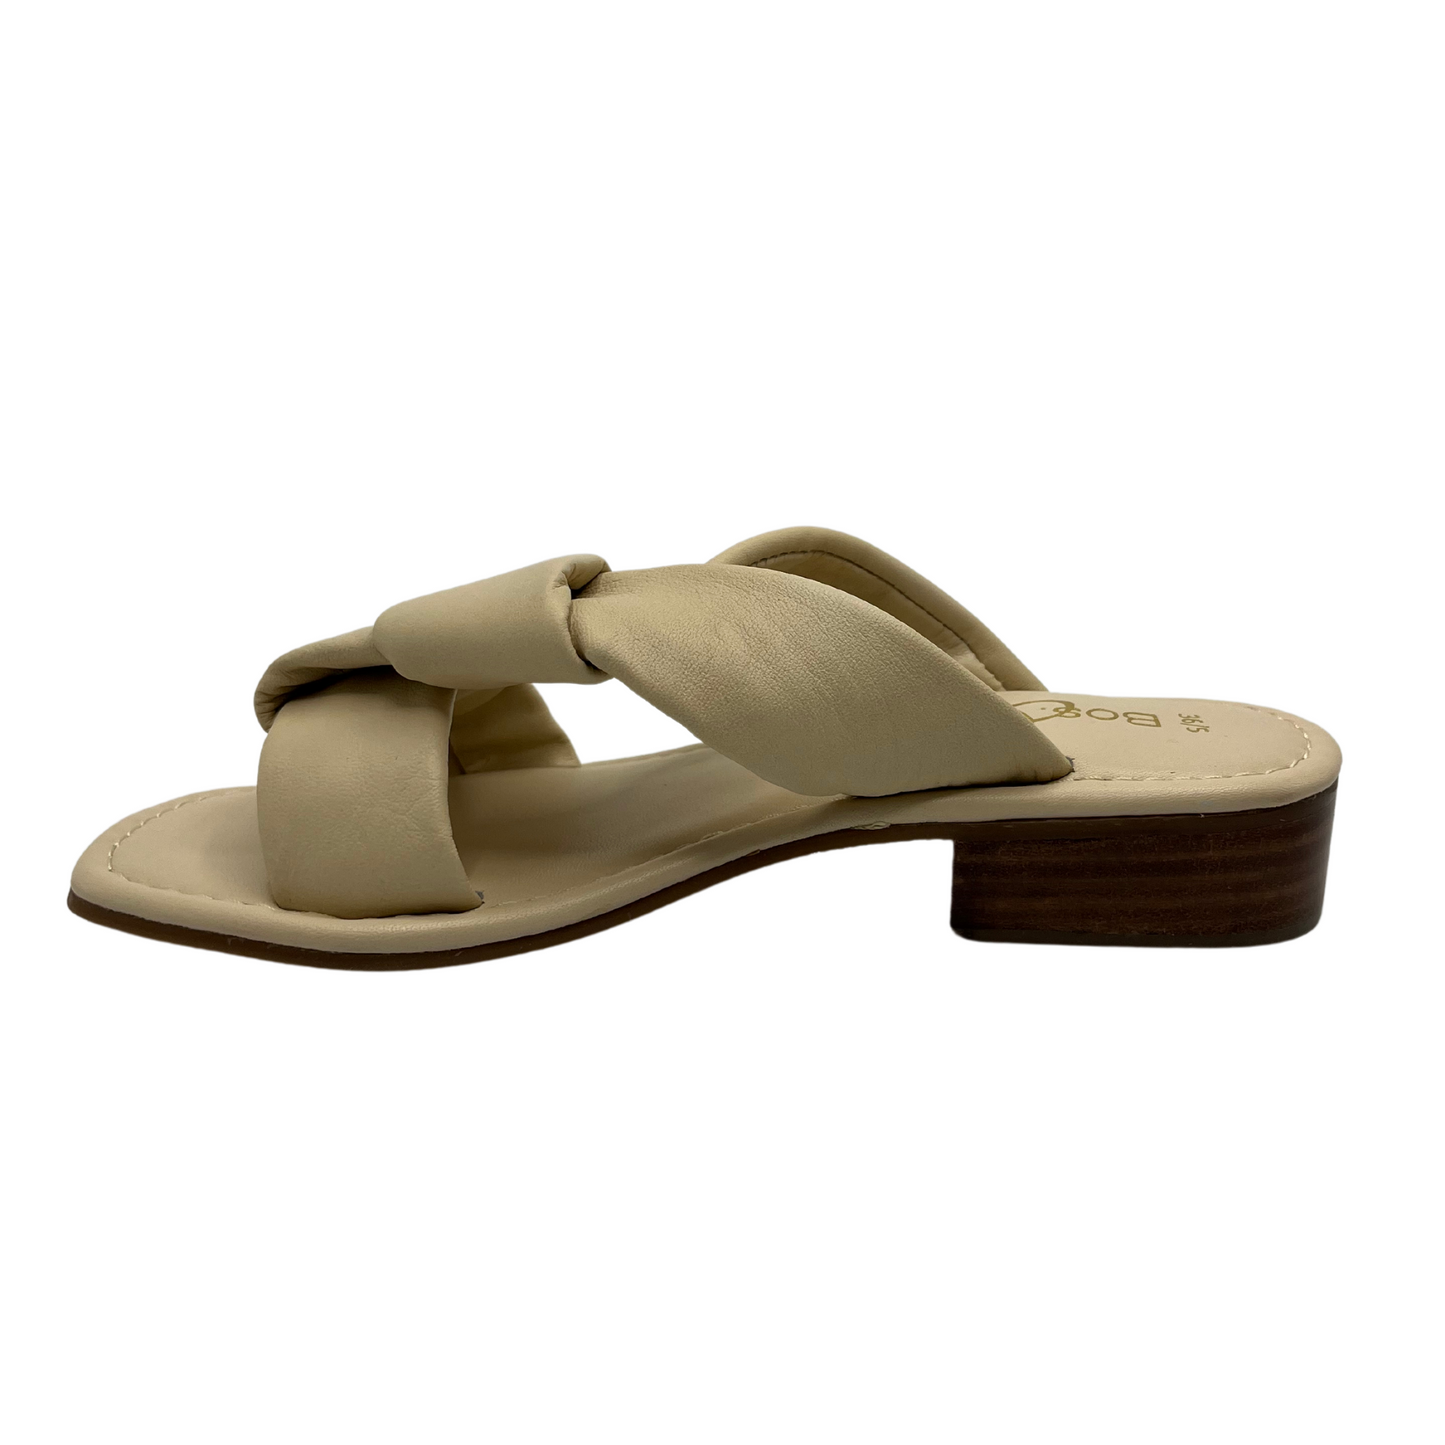 Left facing view of cream leather sandal with short block heel and large knot detail on straps.